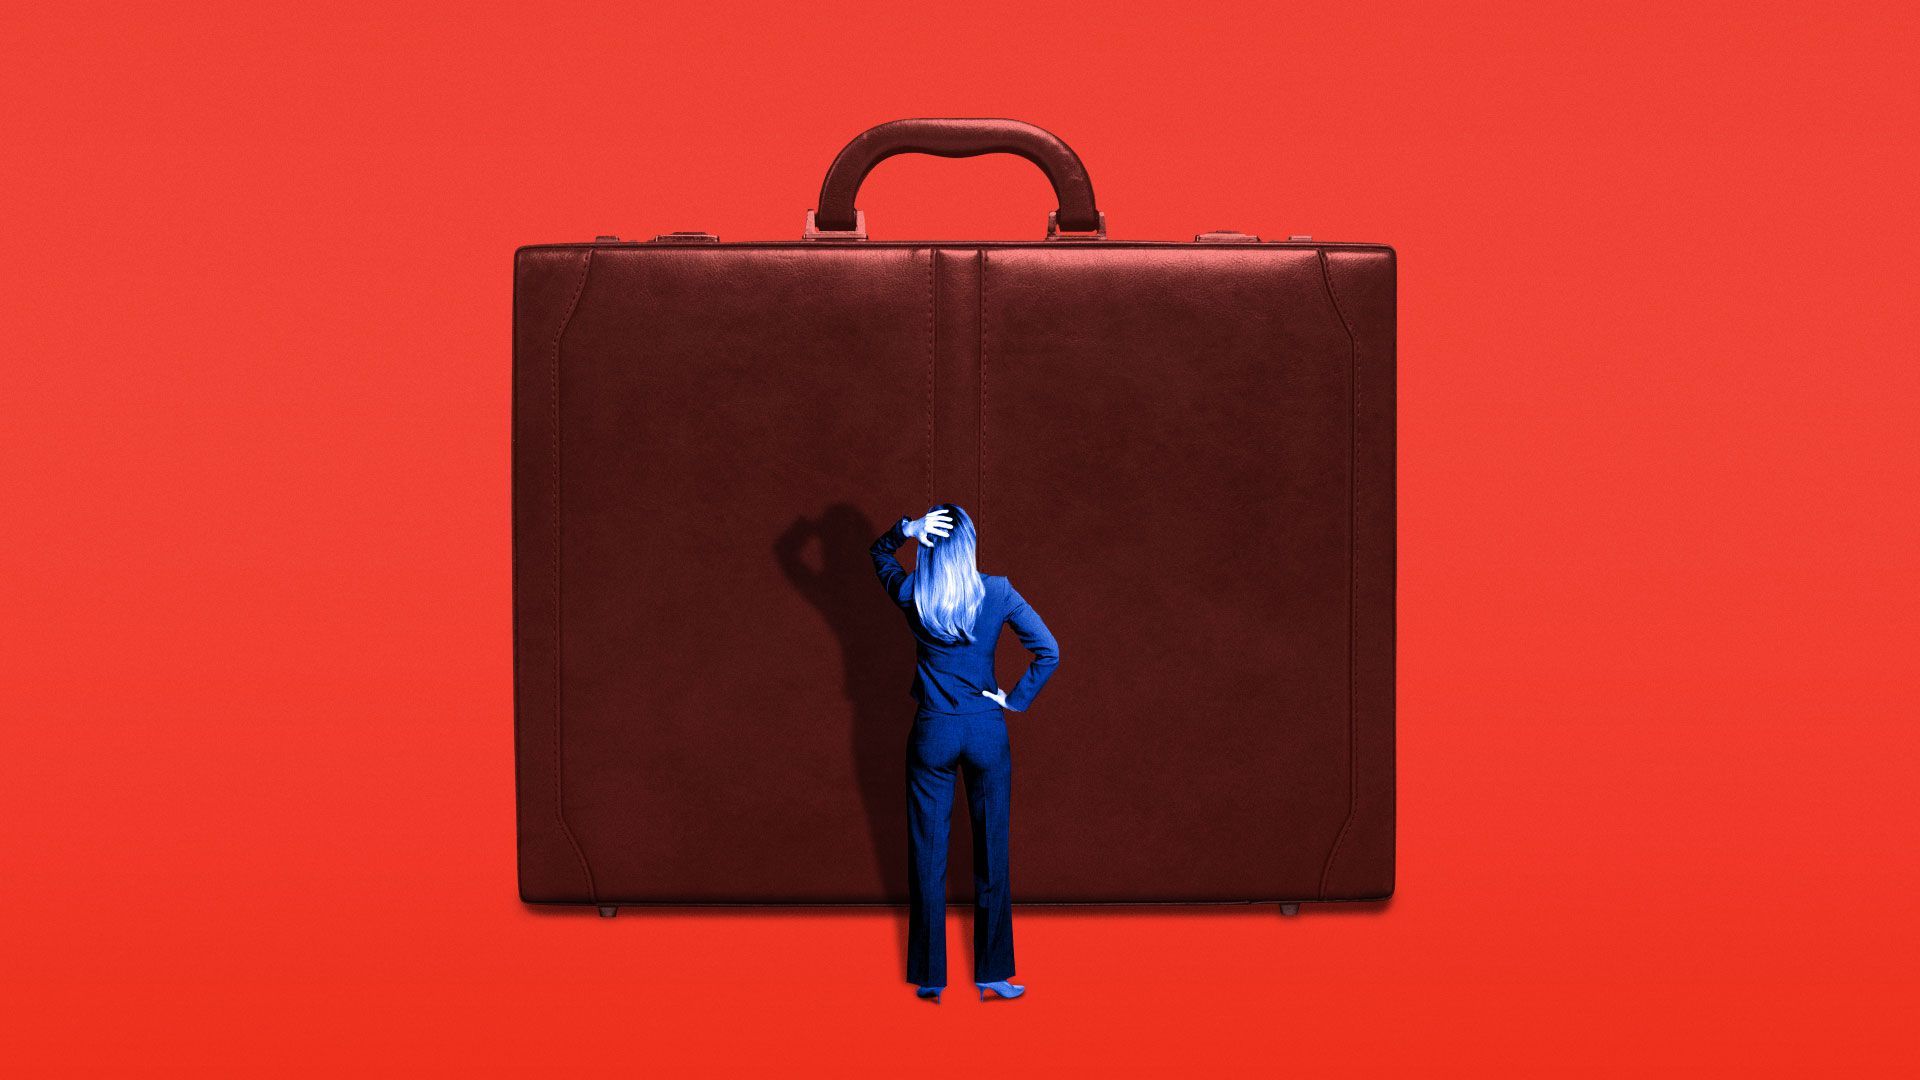 Illustration of person looking up at a large briefcase